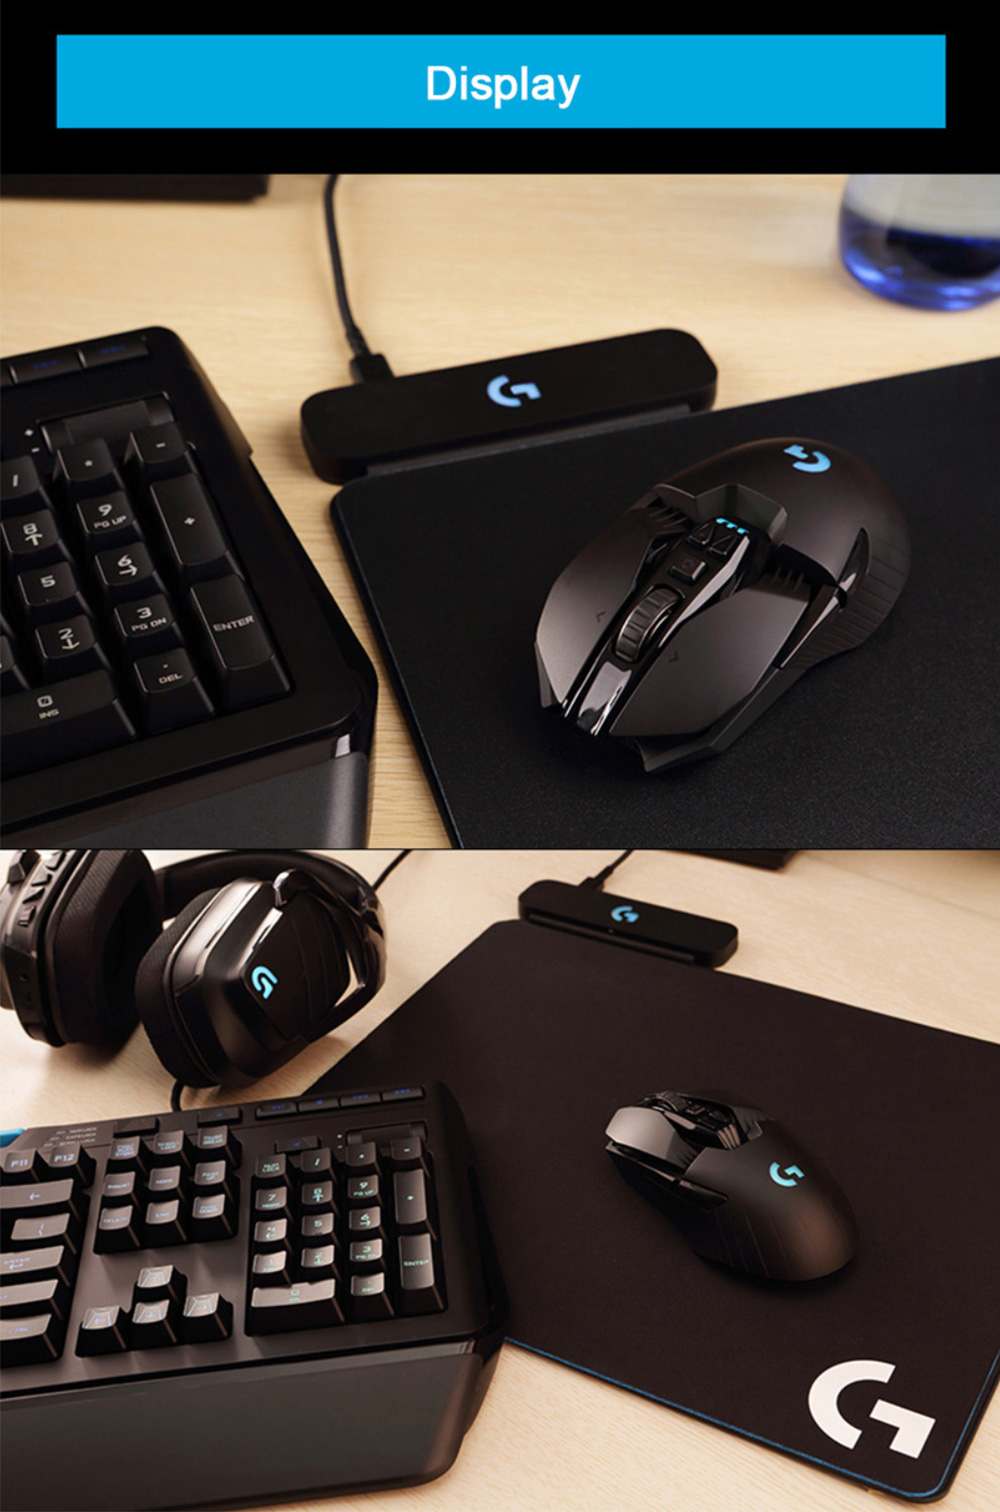 Logitech G903 Gaming Mouse RGB Backlight 16000 DPI USB Wireless Dual Modes Connection - Black